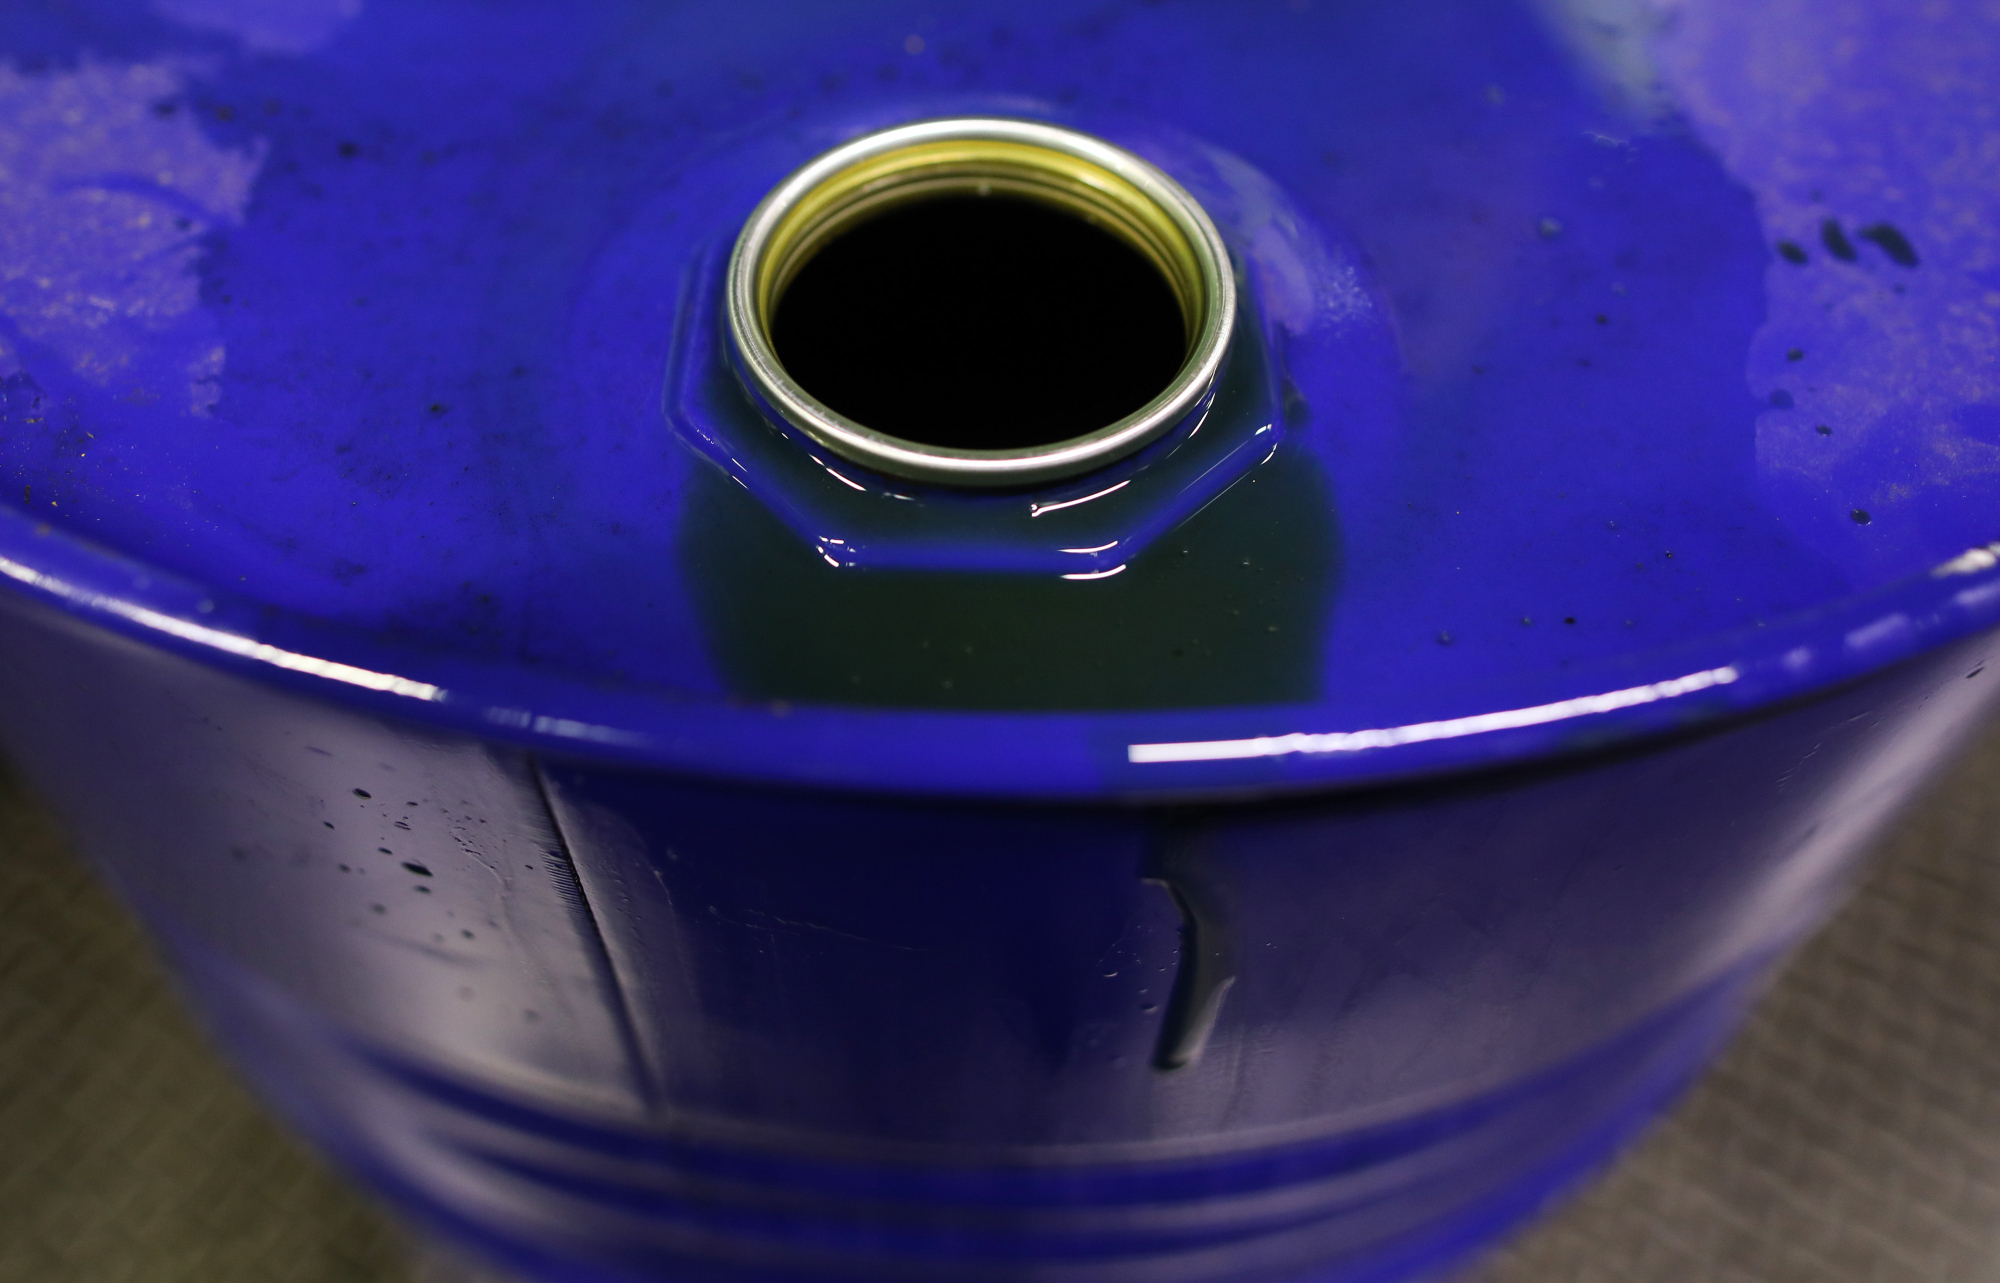 Excess fluid sits on the rim of a barrel of oil based lubricant at Rock Oil Ltd.'s factory in Warrington, U.K., on Monday, March 13, 2017. Oil declined after Saudi Arabia told OPEC it raised production back above 10 million barrels a day in February, reversing about a third of the cuts it made the previous month. Photographer: Chris Ratcliffe/Bloomberg